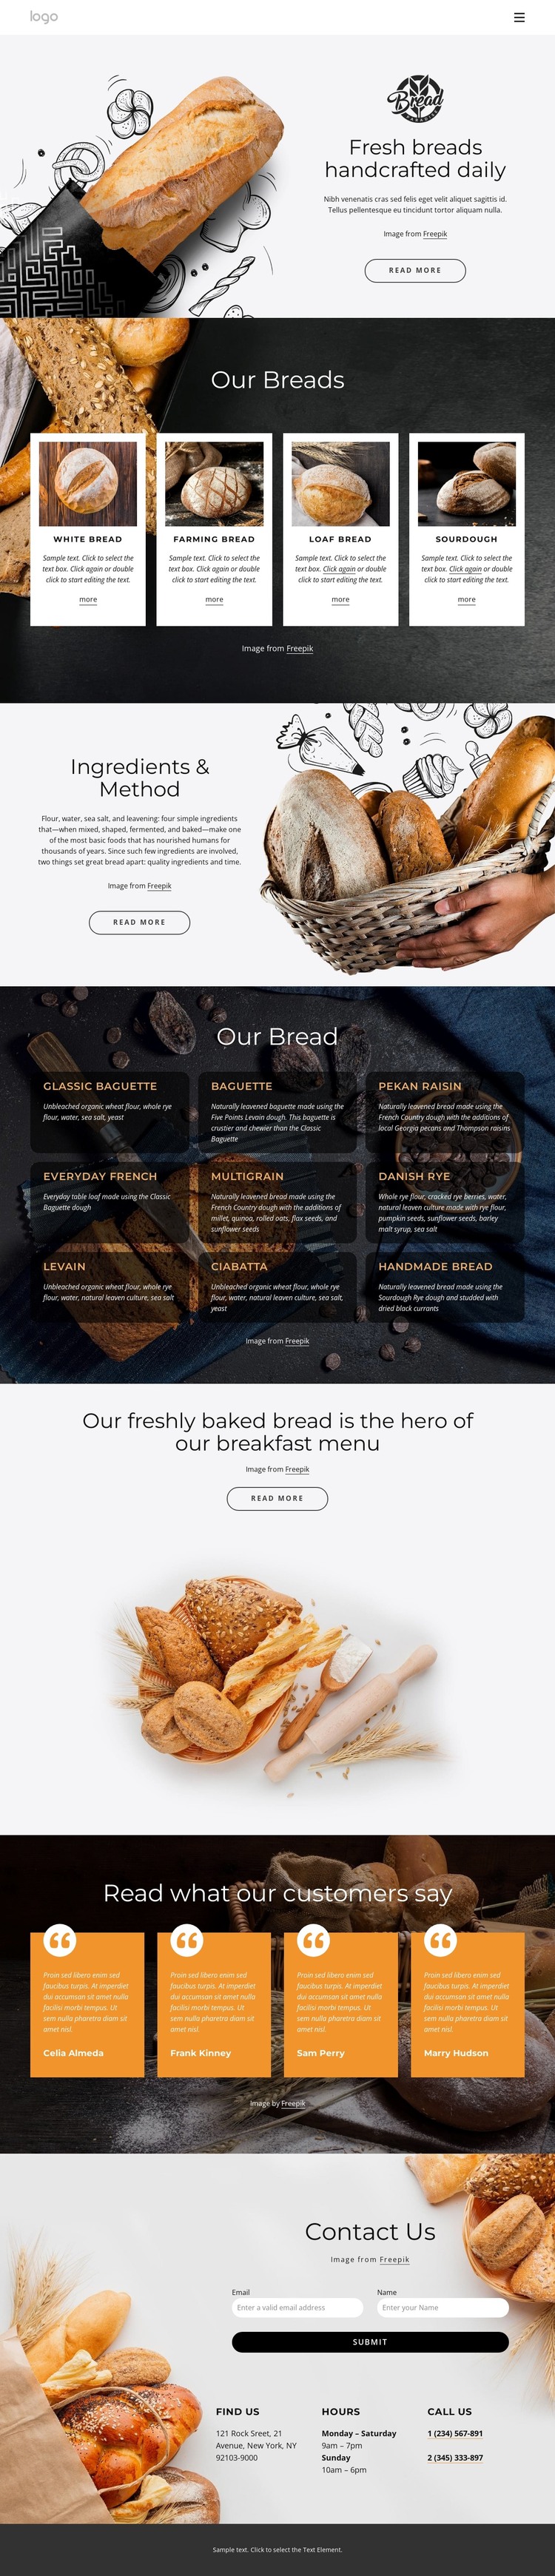 Fresh bread handcrafted every day WordPress Theme